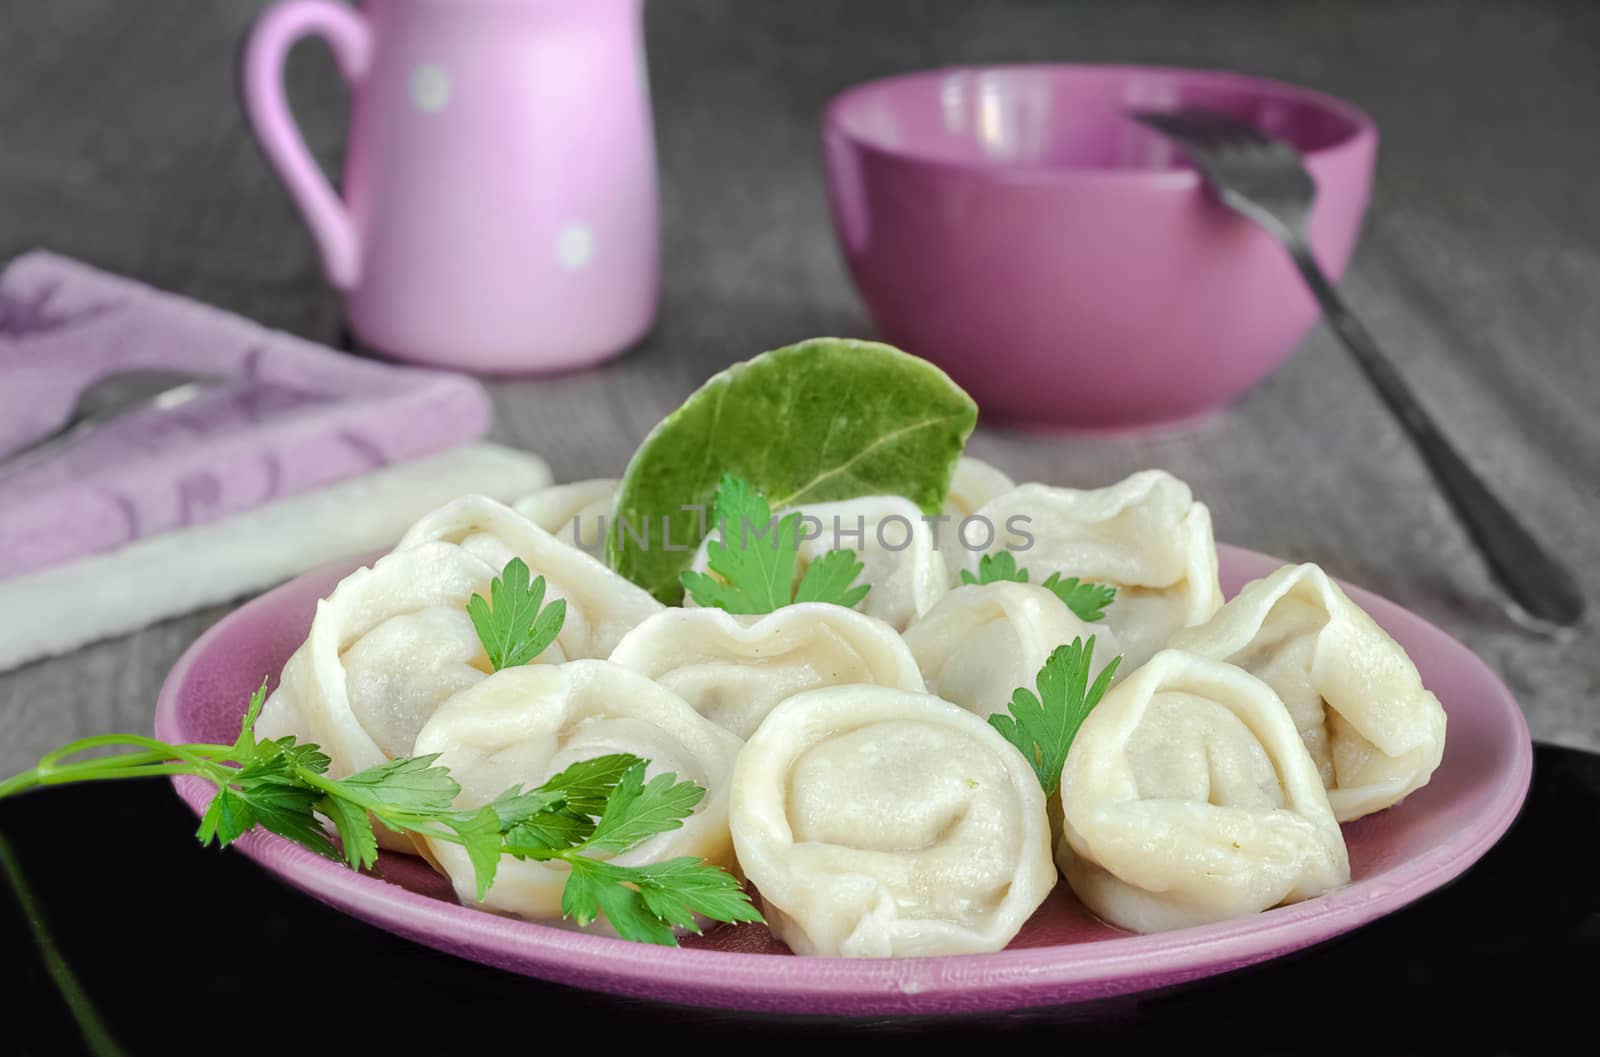 Meat dumplings on the plate and black surface. Kitchenware and gray wooden background. Selective focus.